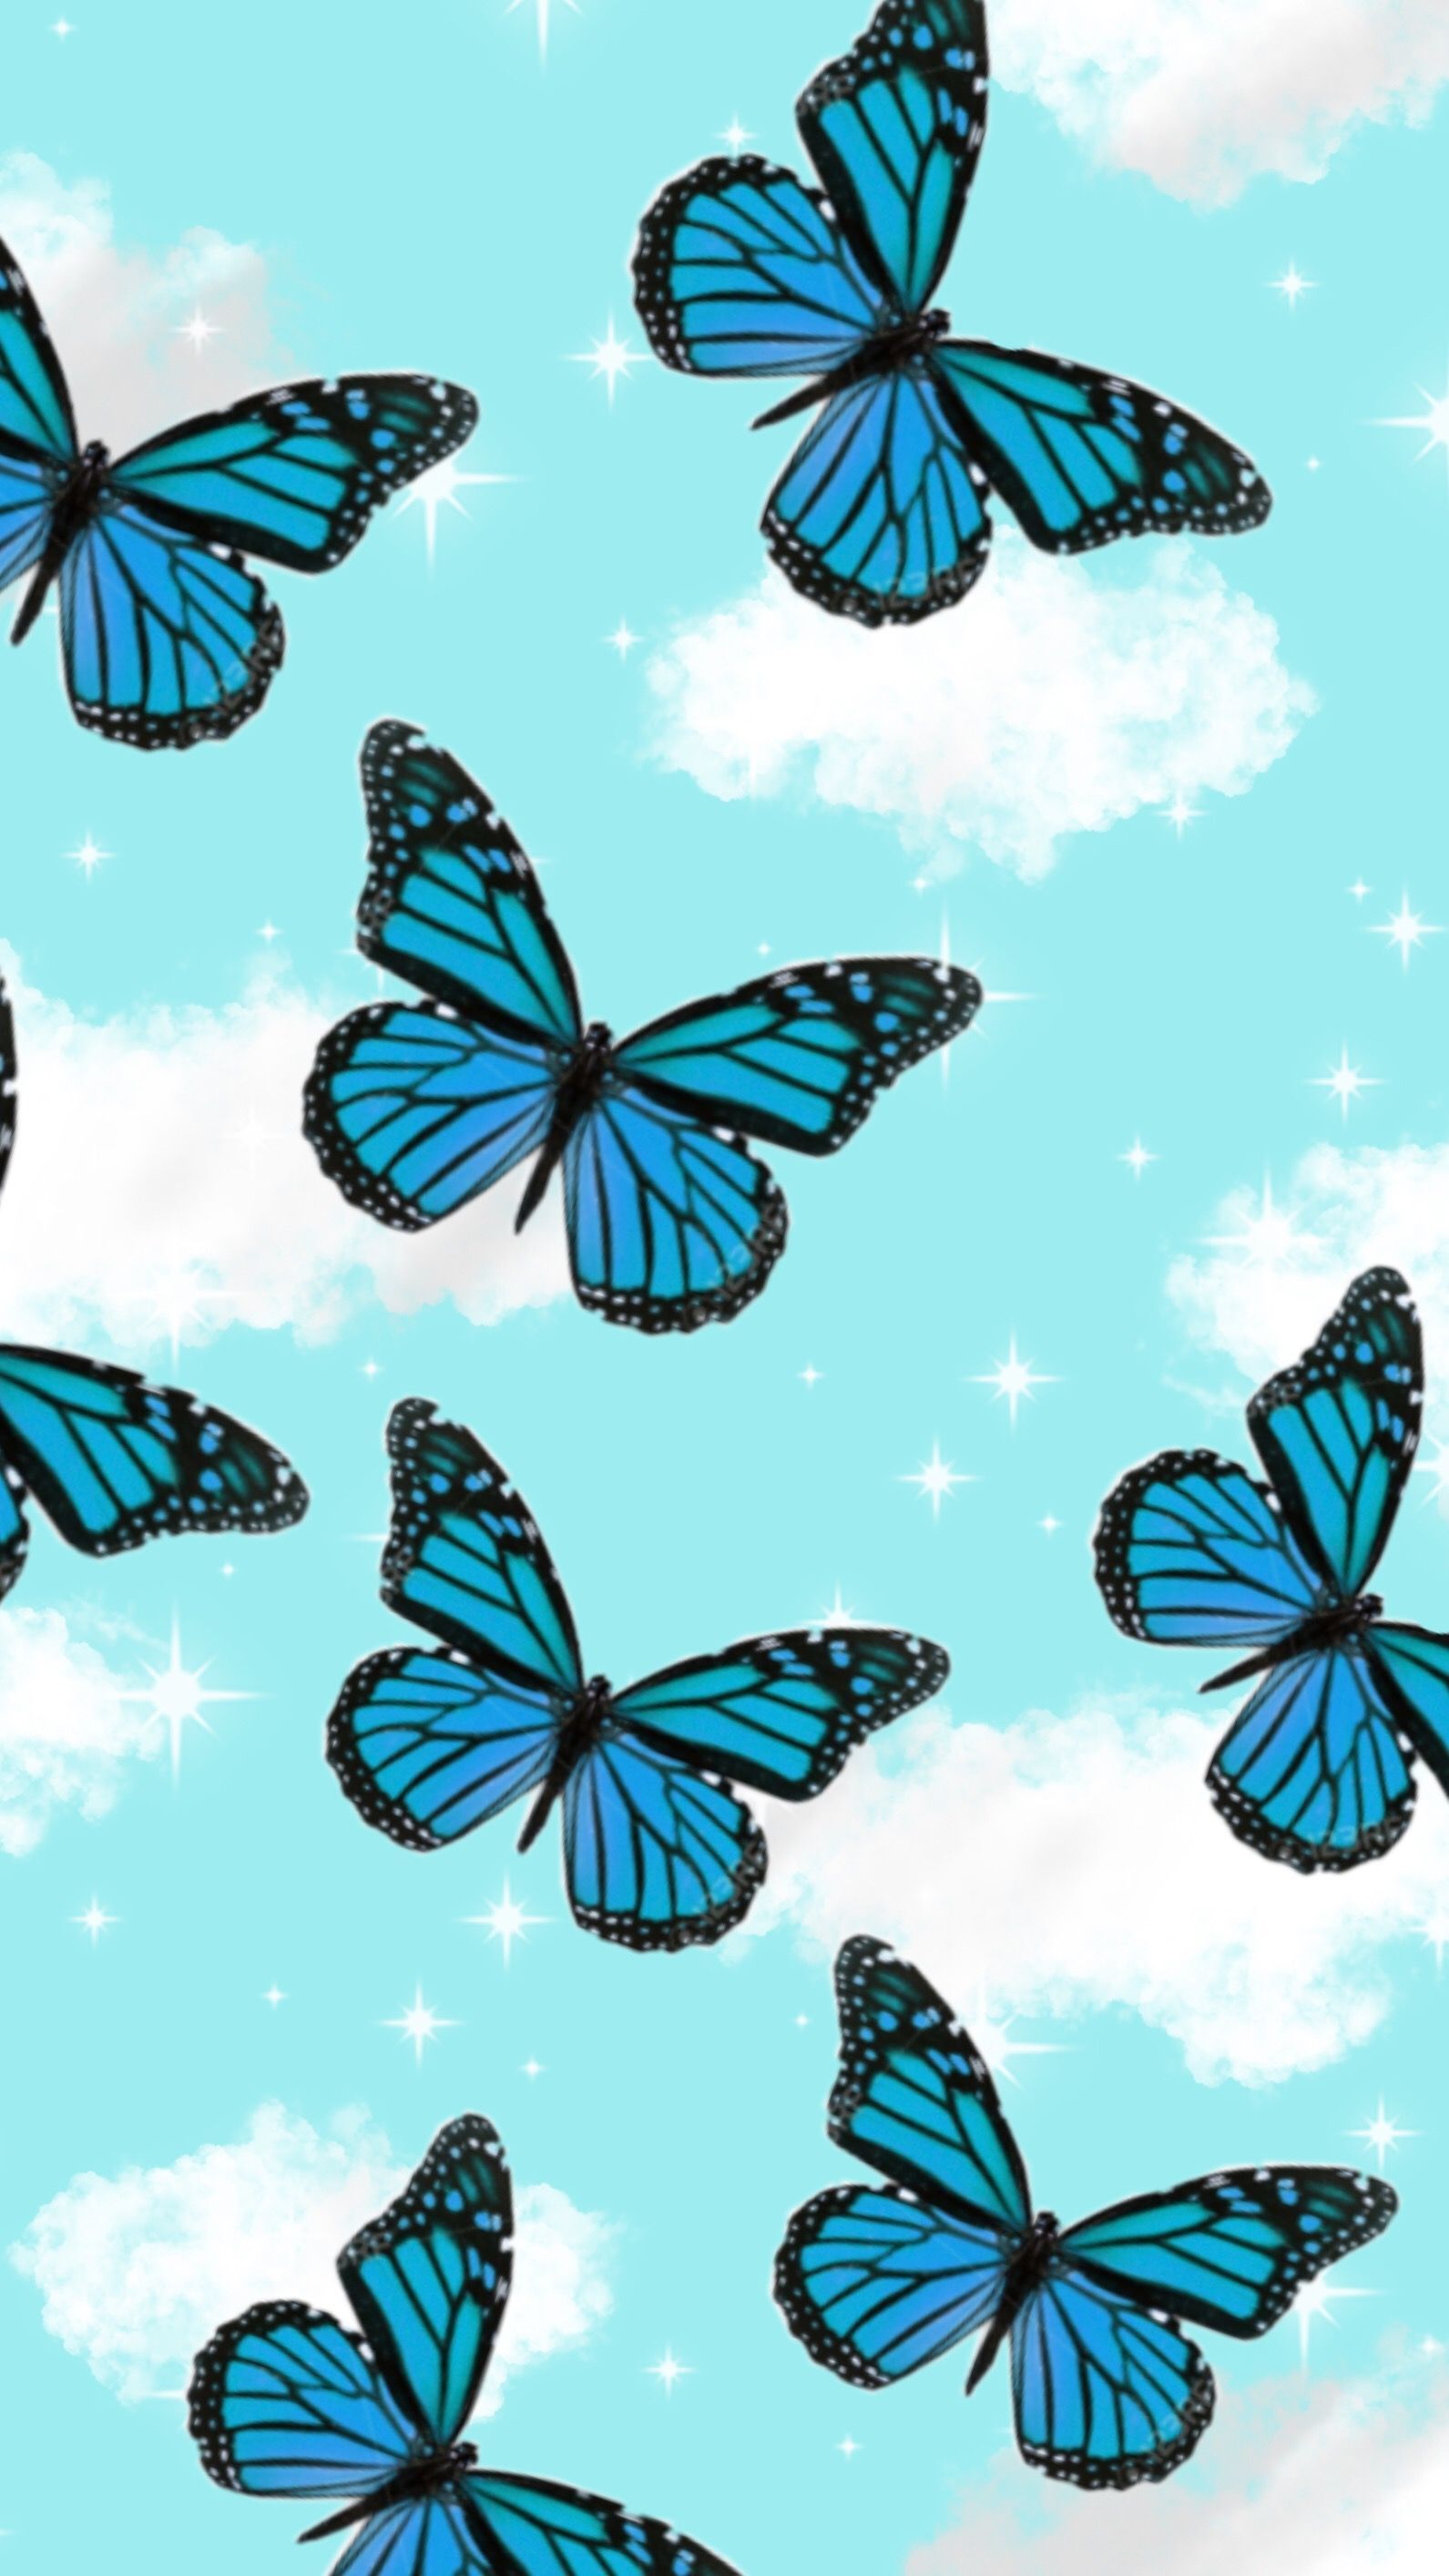 Aesthetic Butterfly Wallpapers Wallpaper Cave - Reverasite